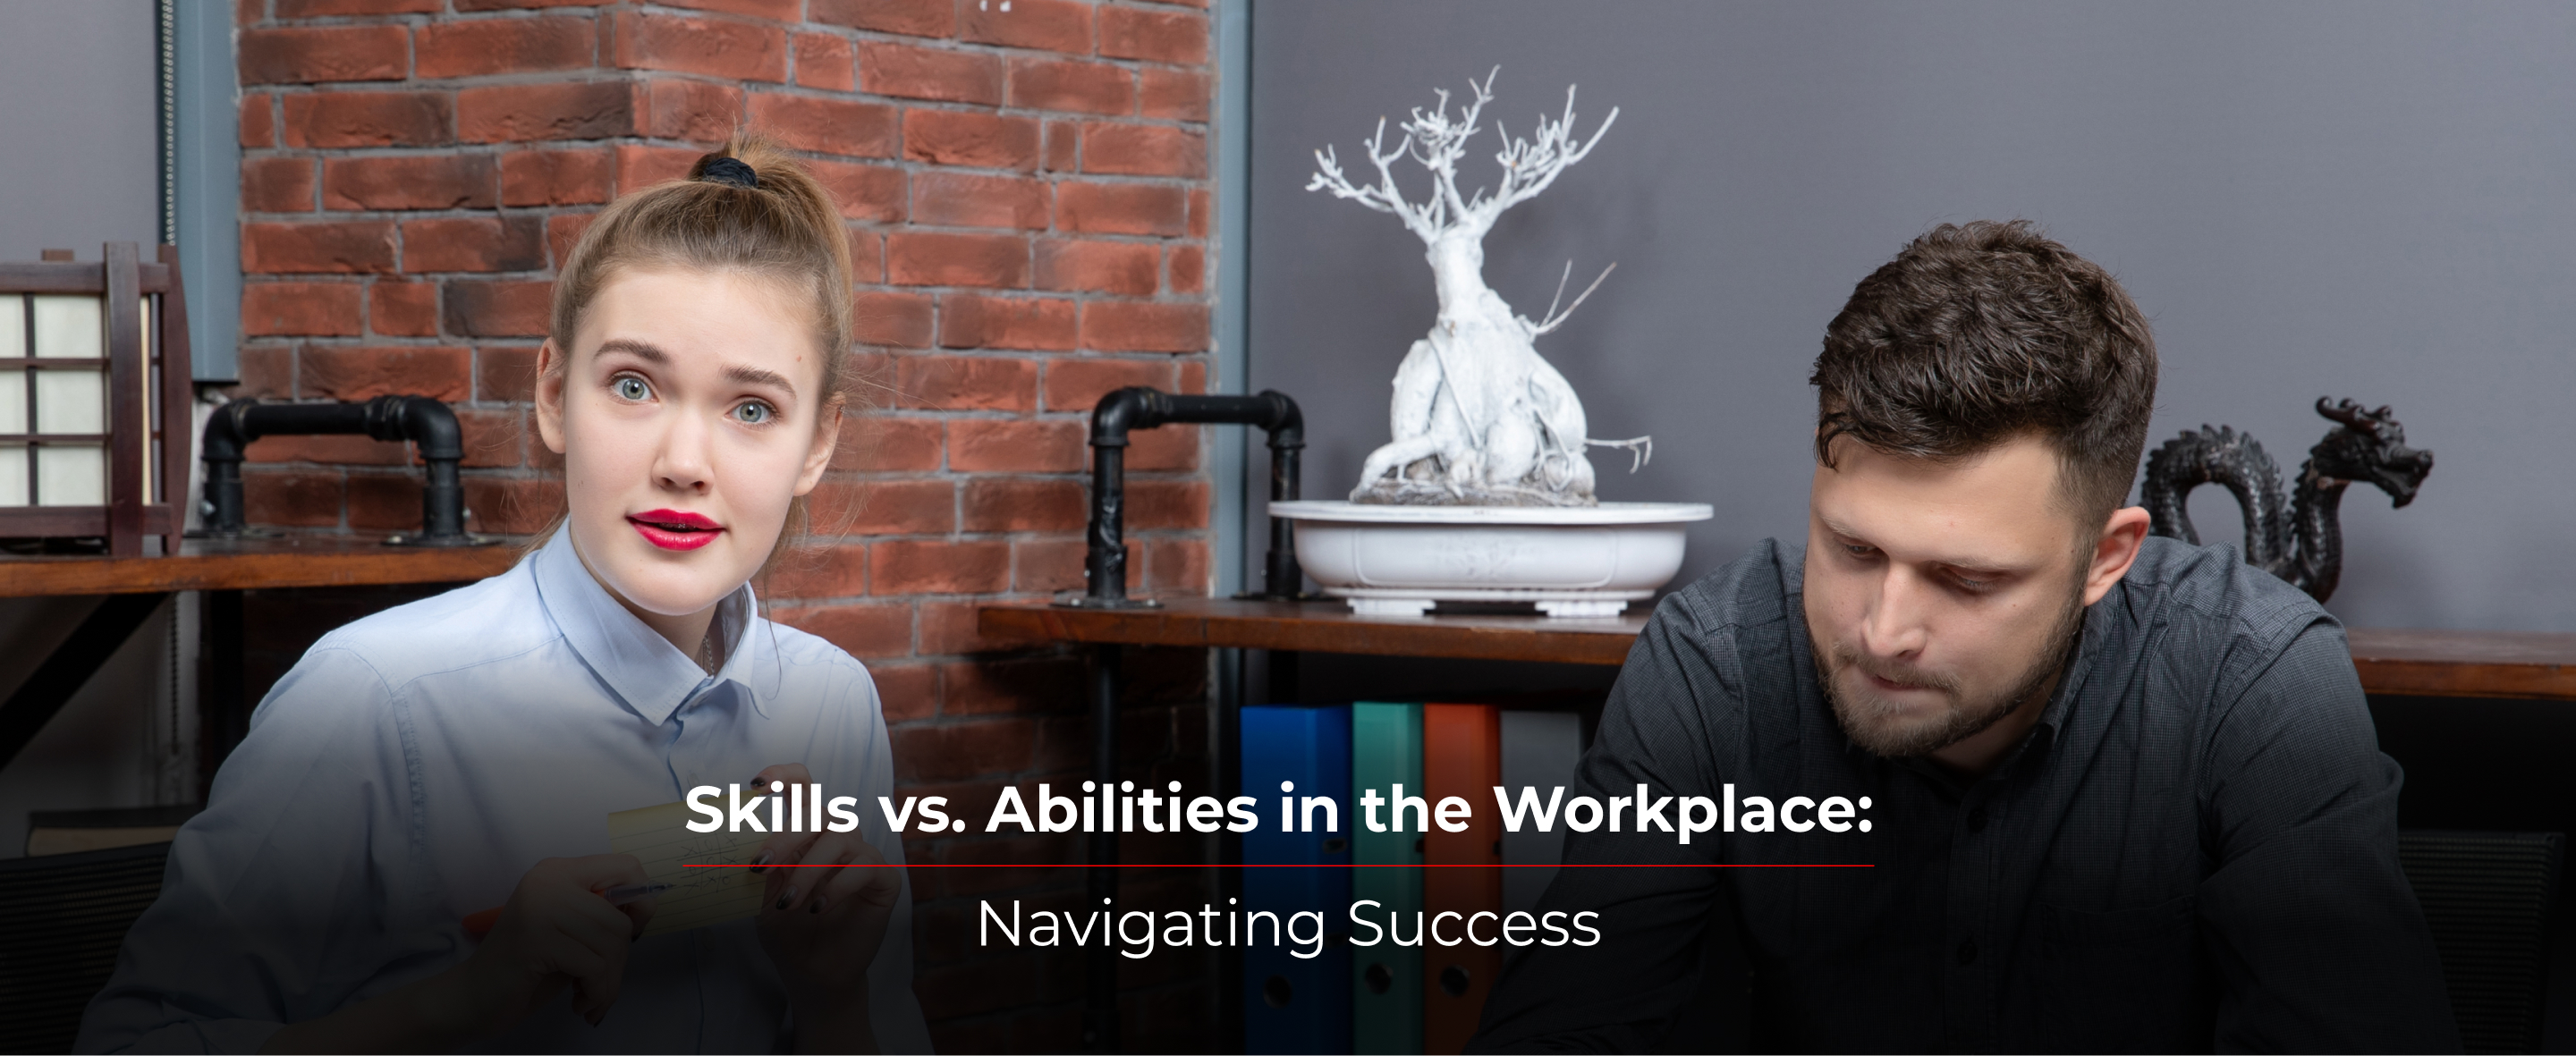 Skills vs. Abilities in the Workplace: Navigating Success